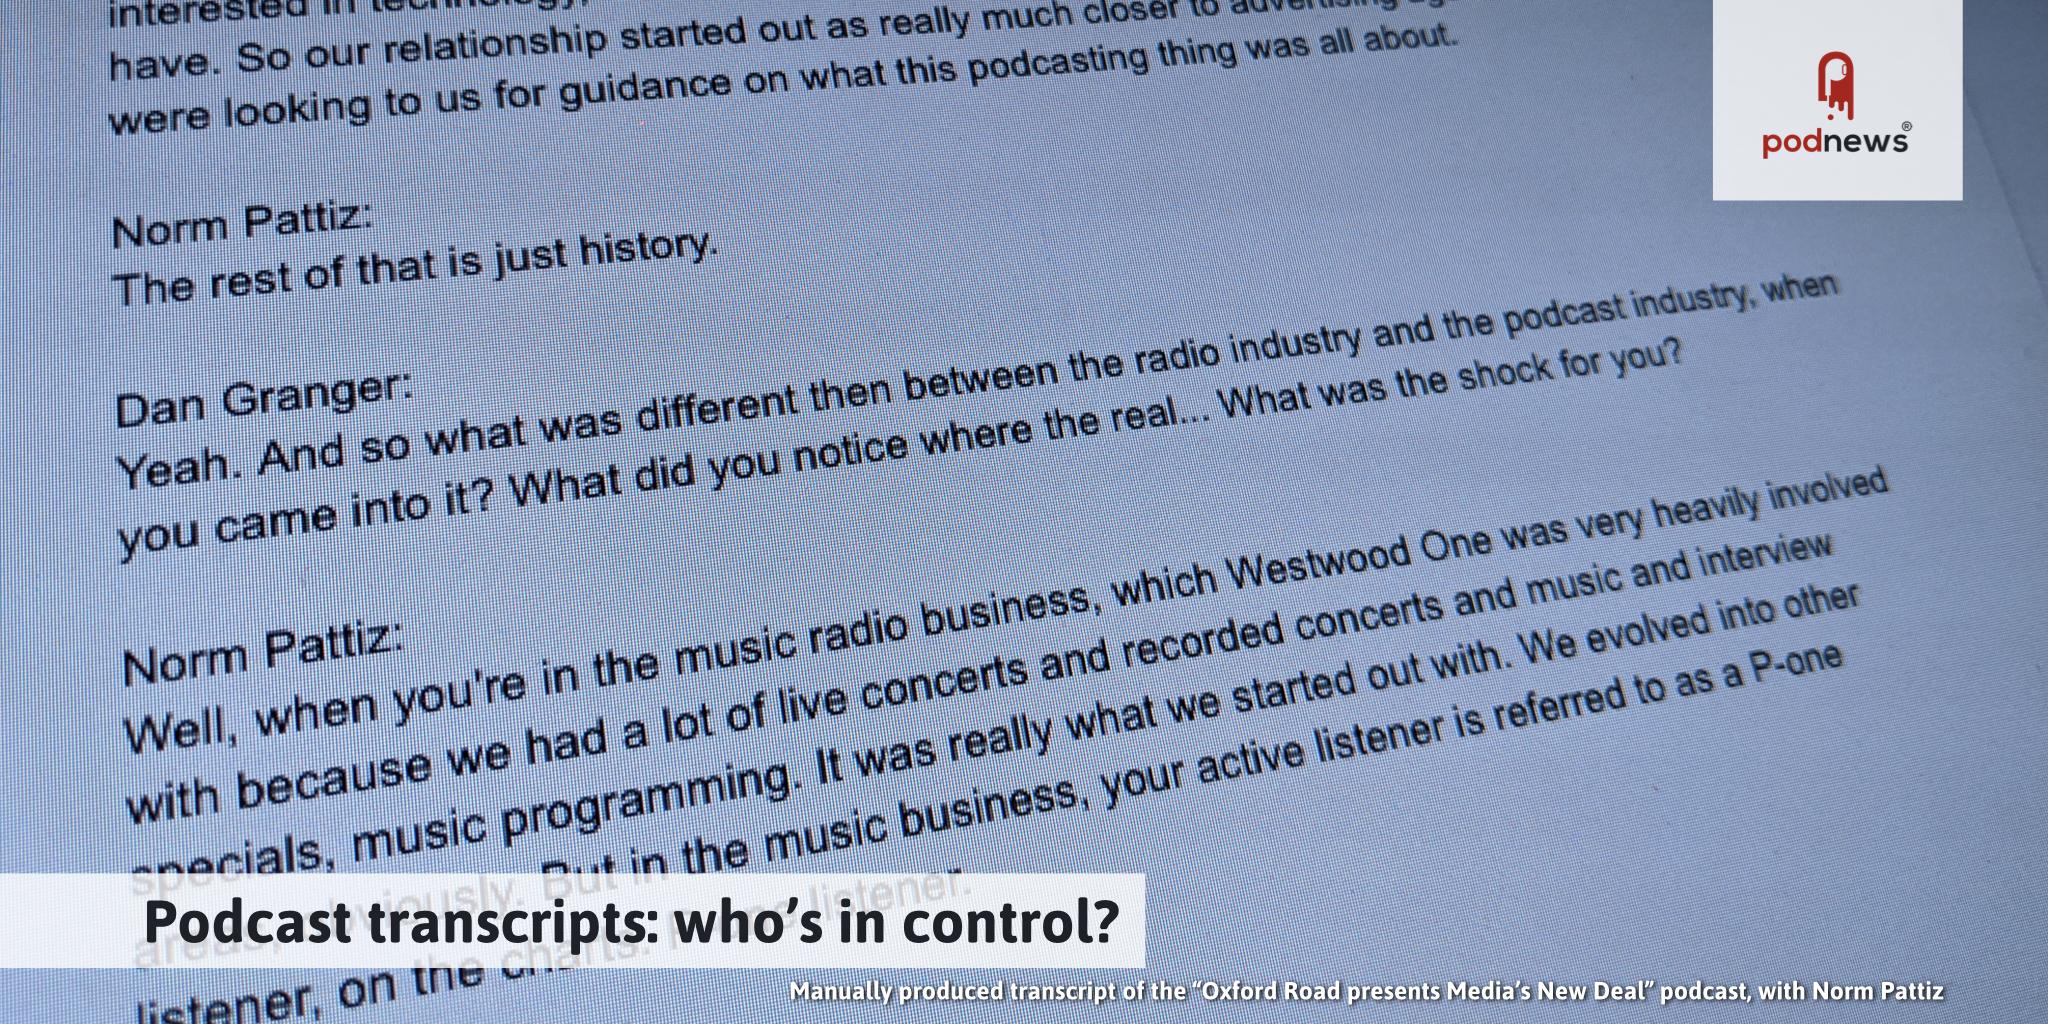 Podcast transcripts: who's in control?